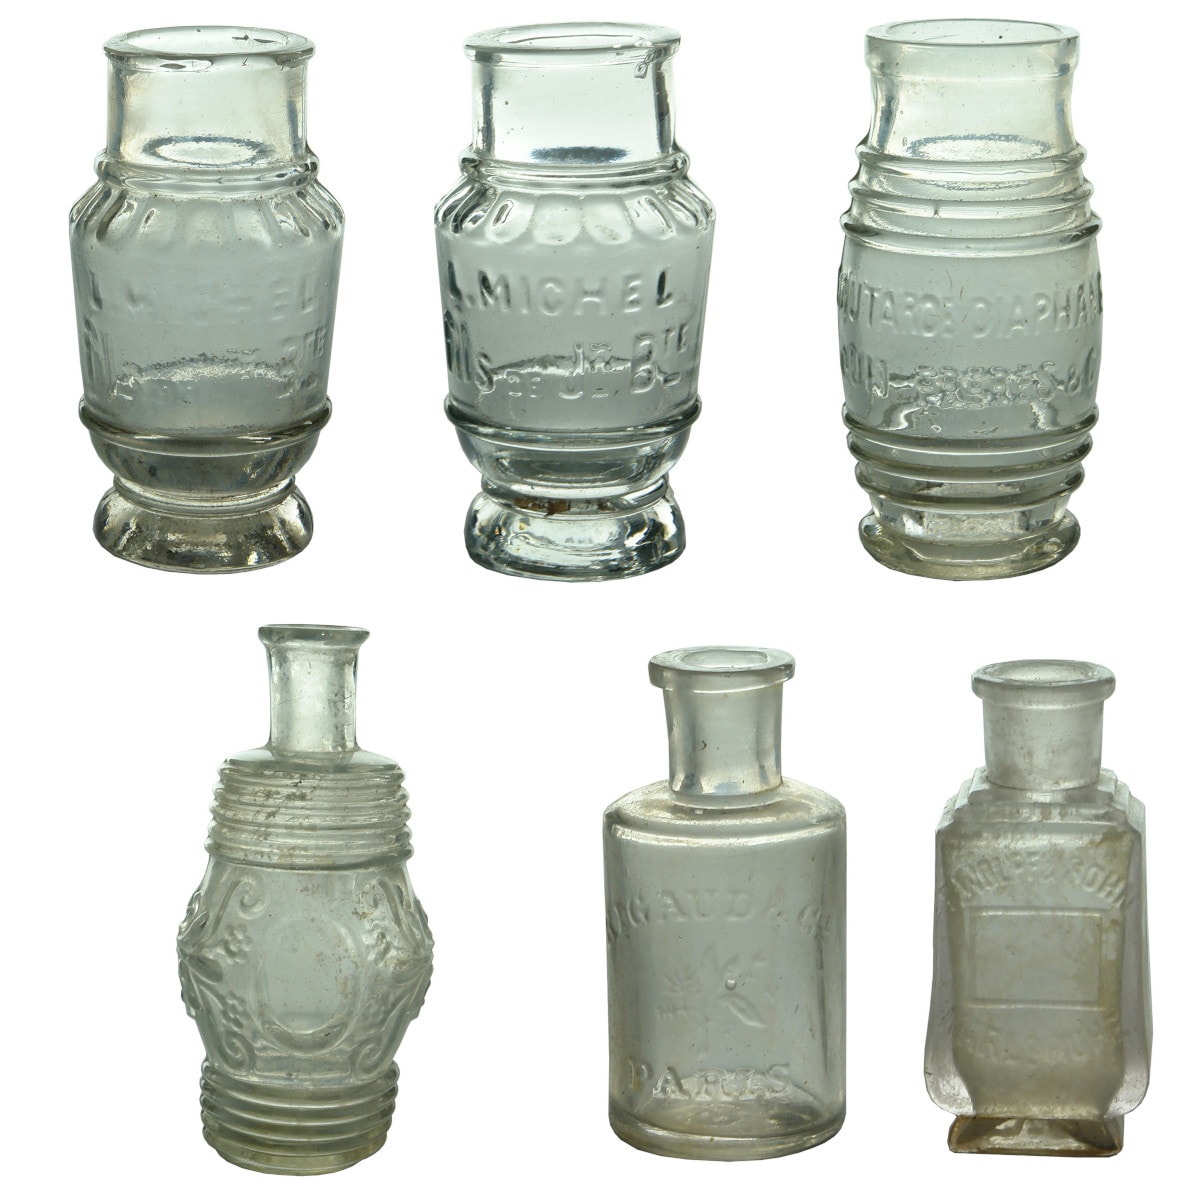 6 Clear/Flint glass bottles: 3 French Mustard Jars: 2 x L. Michel; Louit Freres & Co. and 3 Perfumes, Fancy large Barrel shape with Pontil scar; Rigaud, Paris; Wolff & Sohn, Carlsruhe.